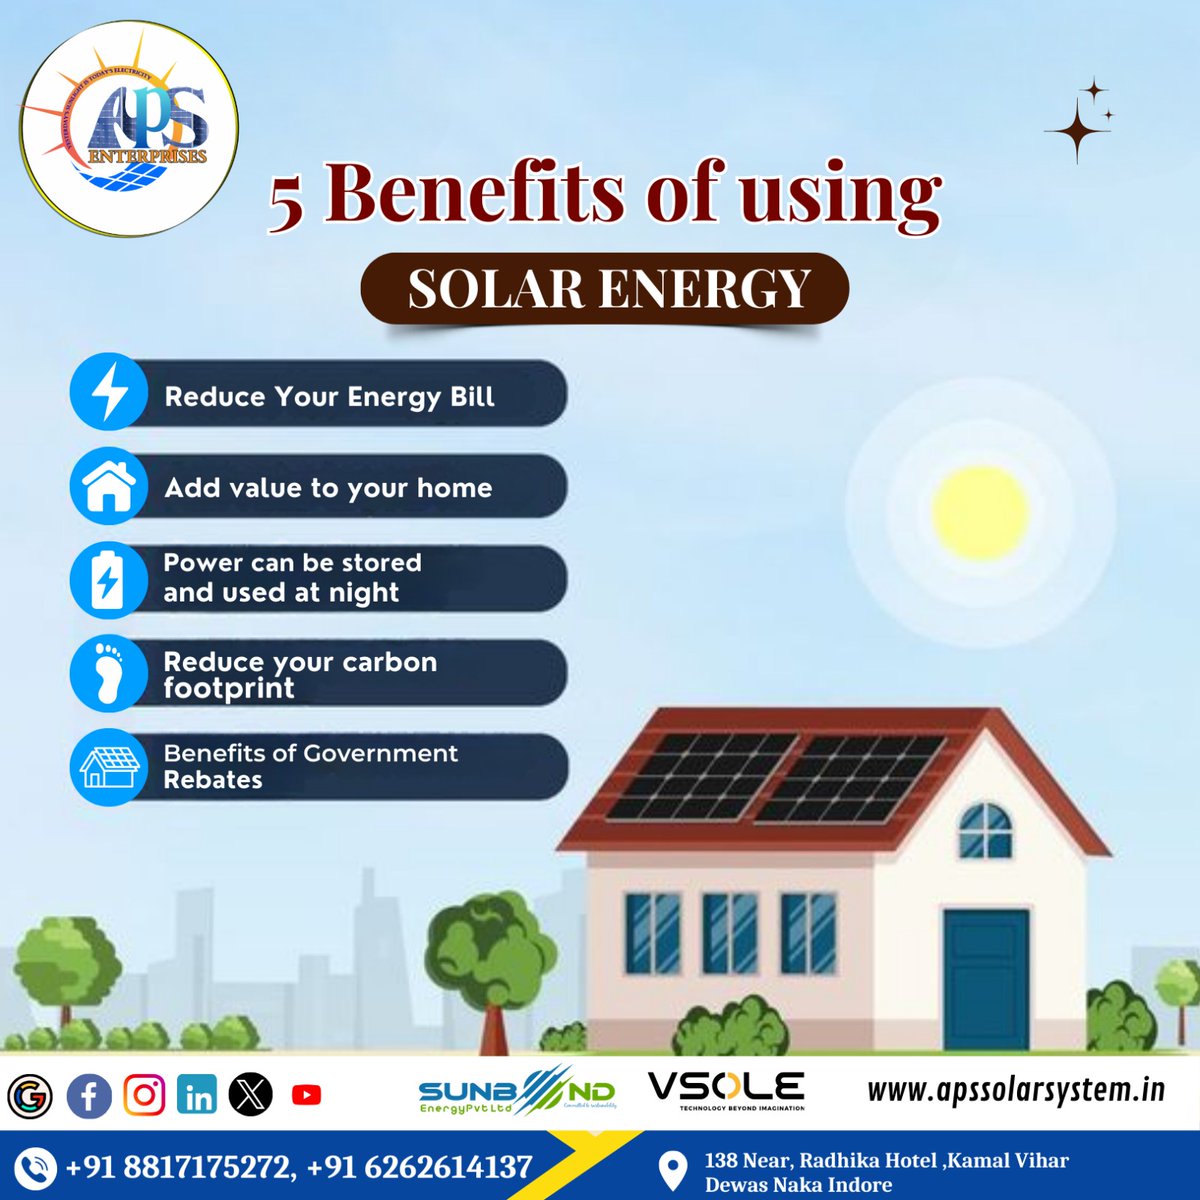 5 reasons to love solar: Clean, affordable, independent, durable, and eco-friendly! ☀️💰🌱 #solarpower
.
.
#SolarLove #CleanEnergyWins #SunPoweredLiving #RenewableRevolution #SustainableSolar #GoGreenWithSun #SolarSavings #BrighterFuture #CleanAndGreen #SolarBenefits